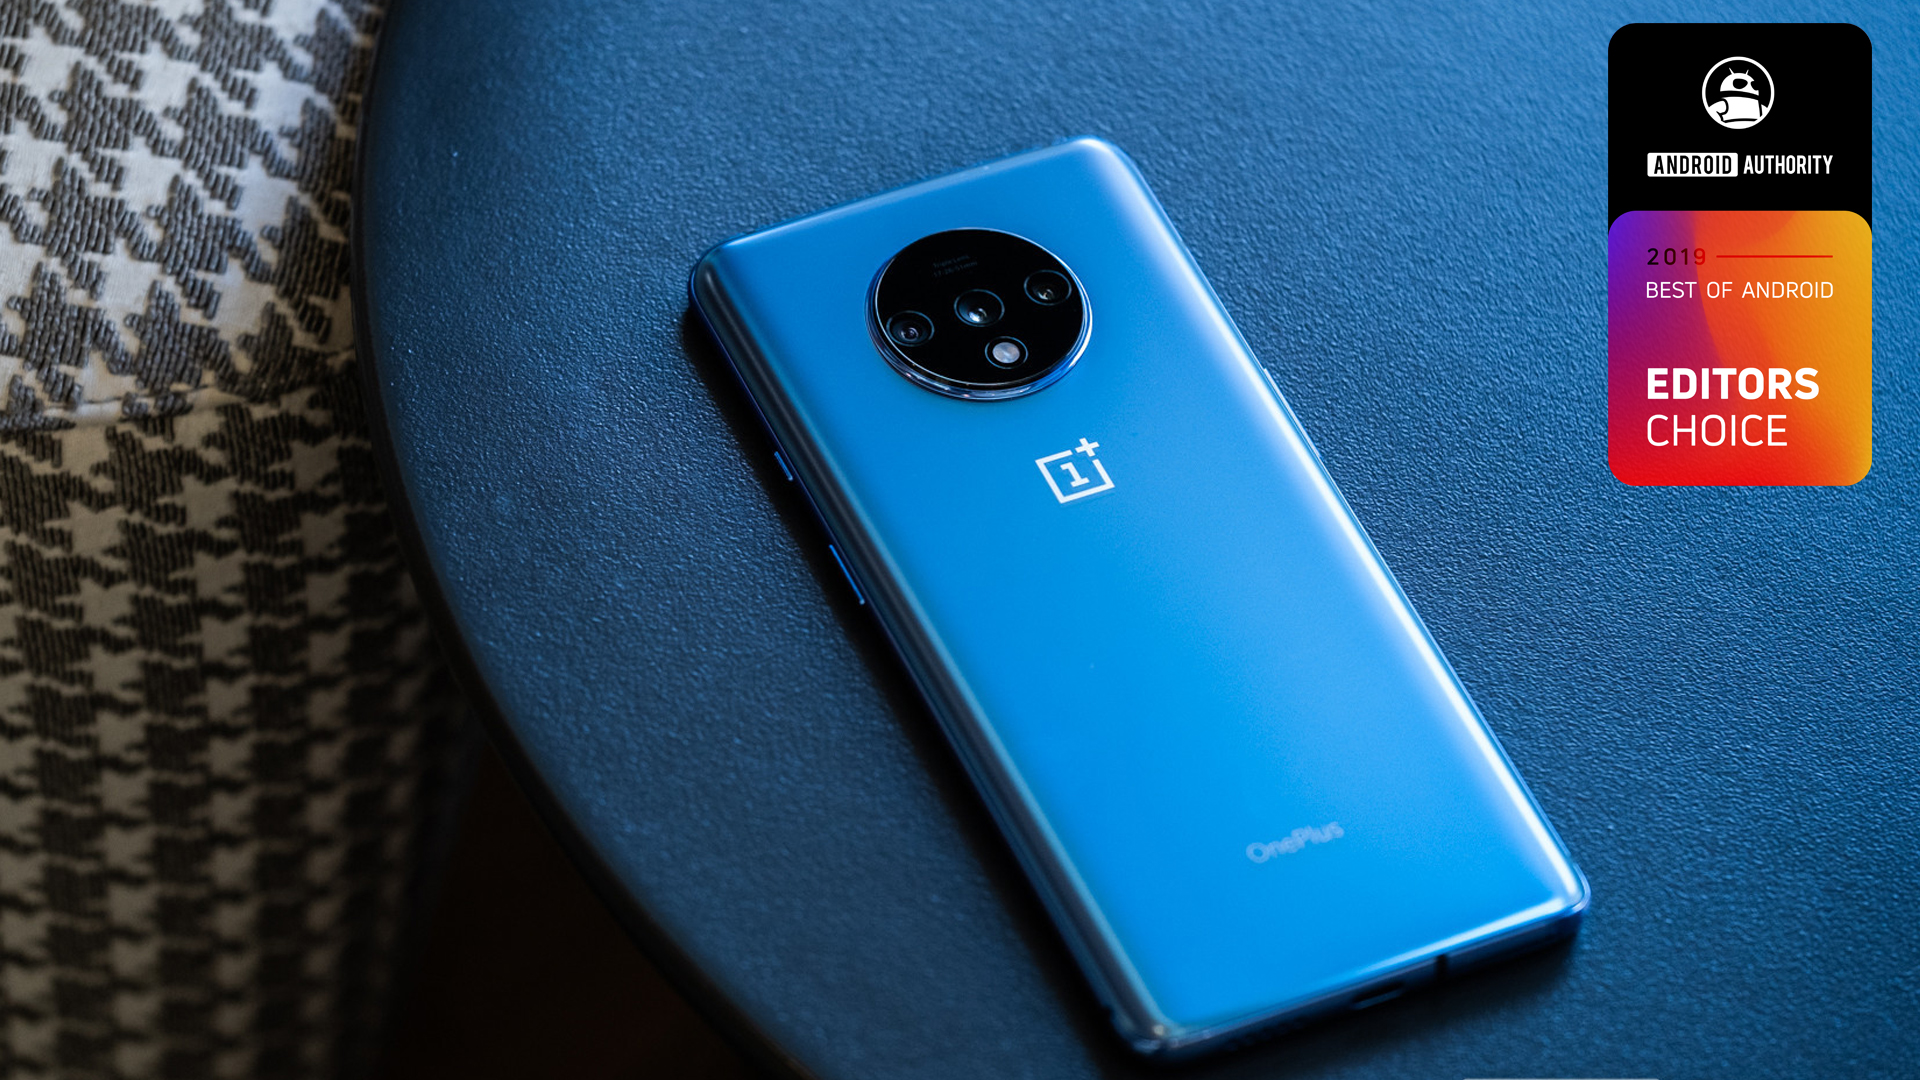 oneplus 7t best of android editors choice 2019